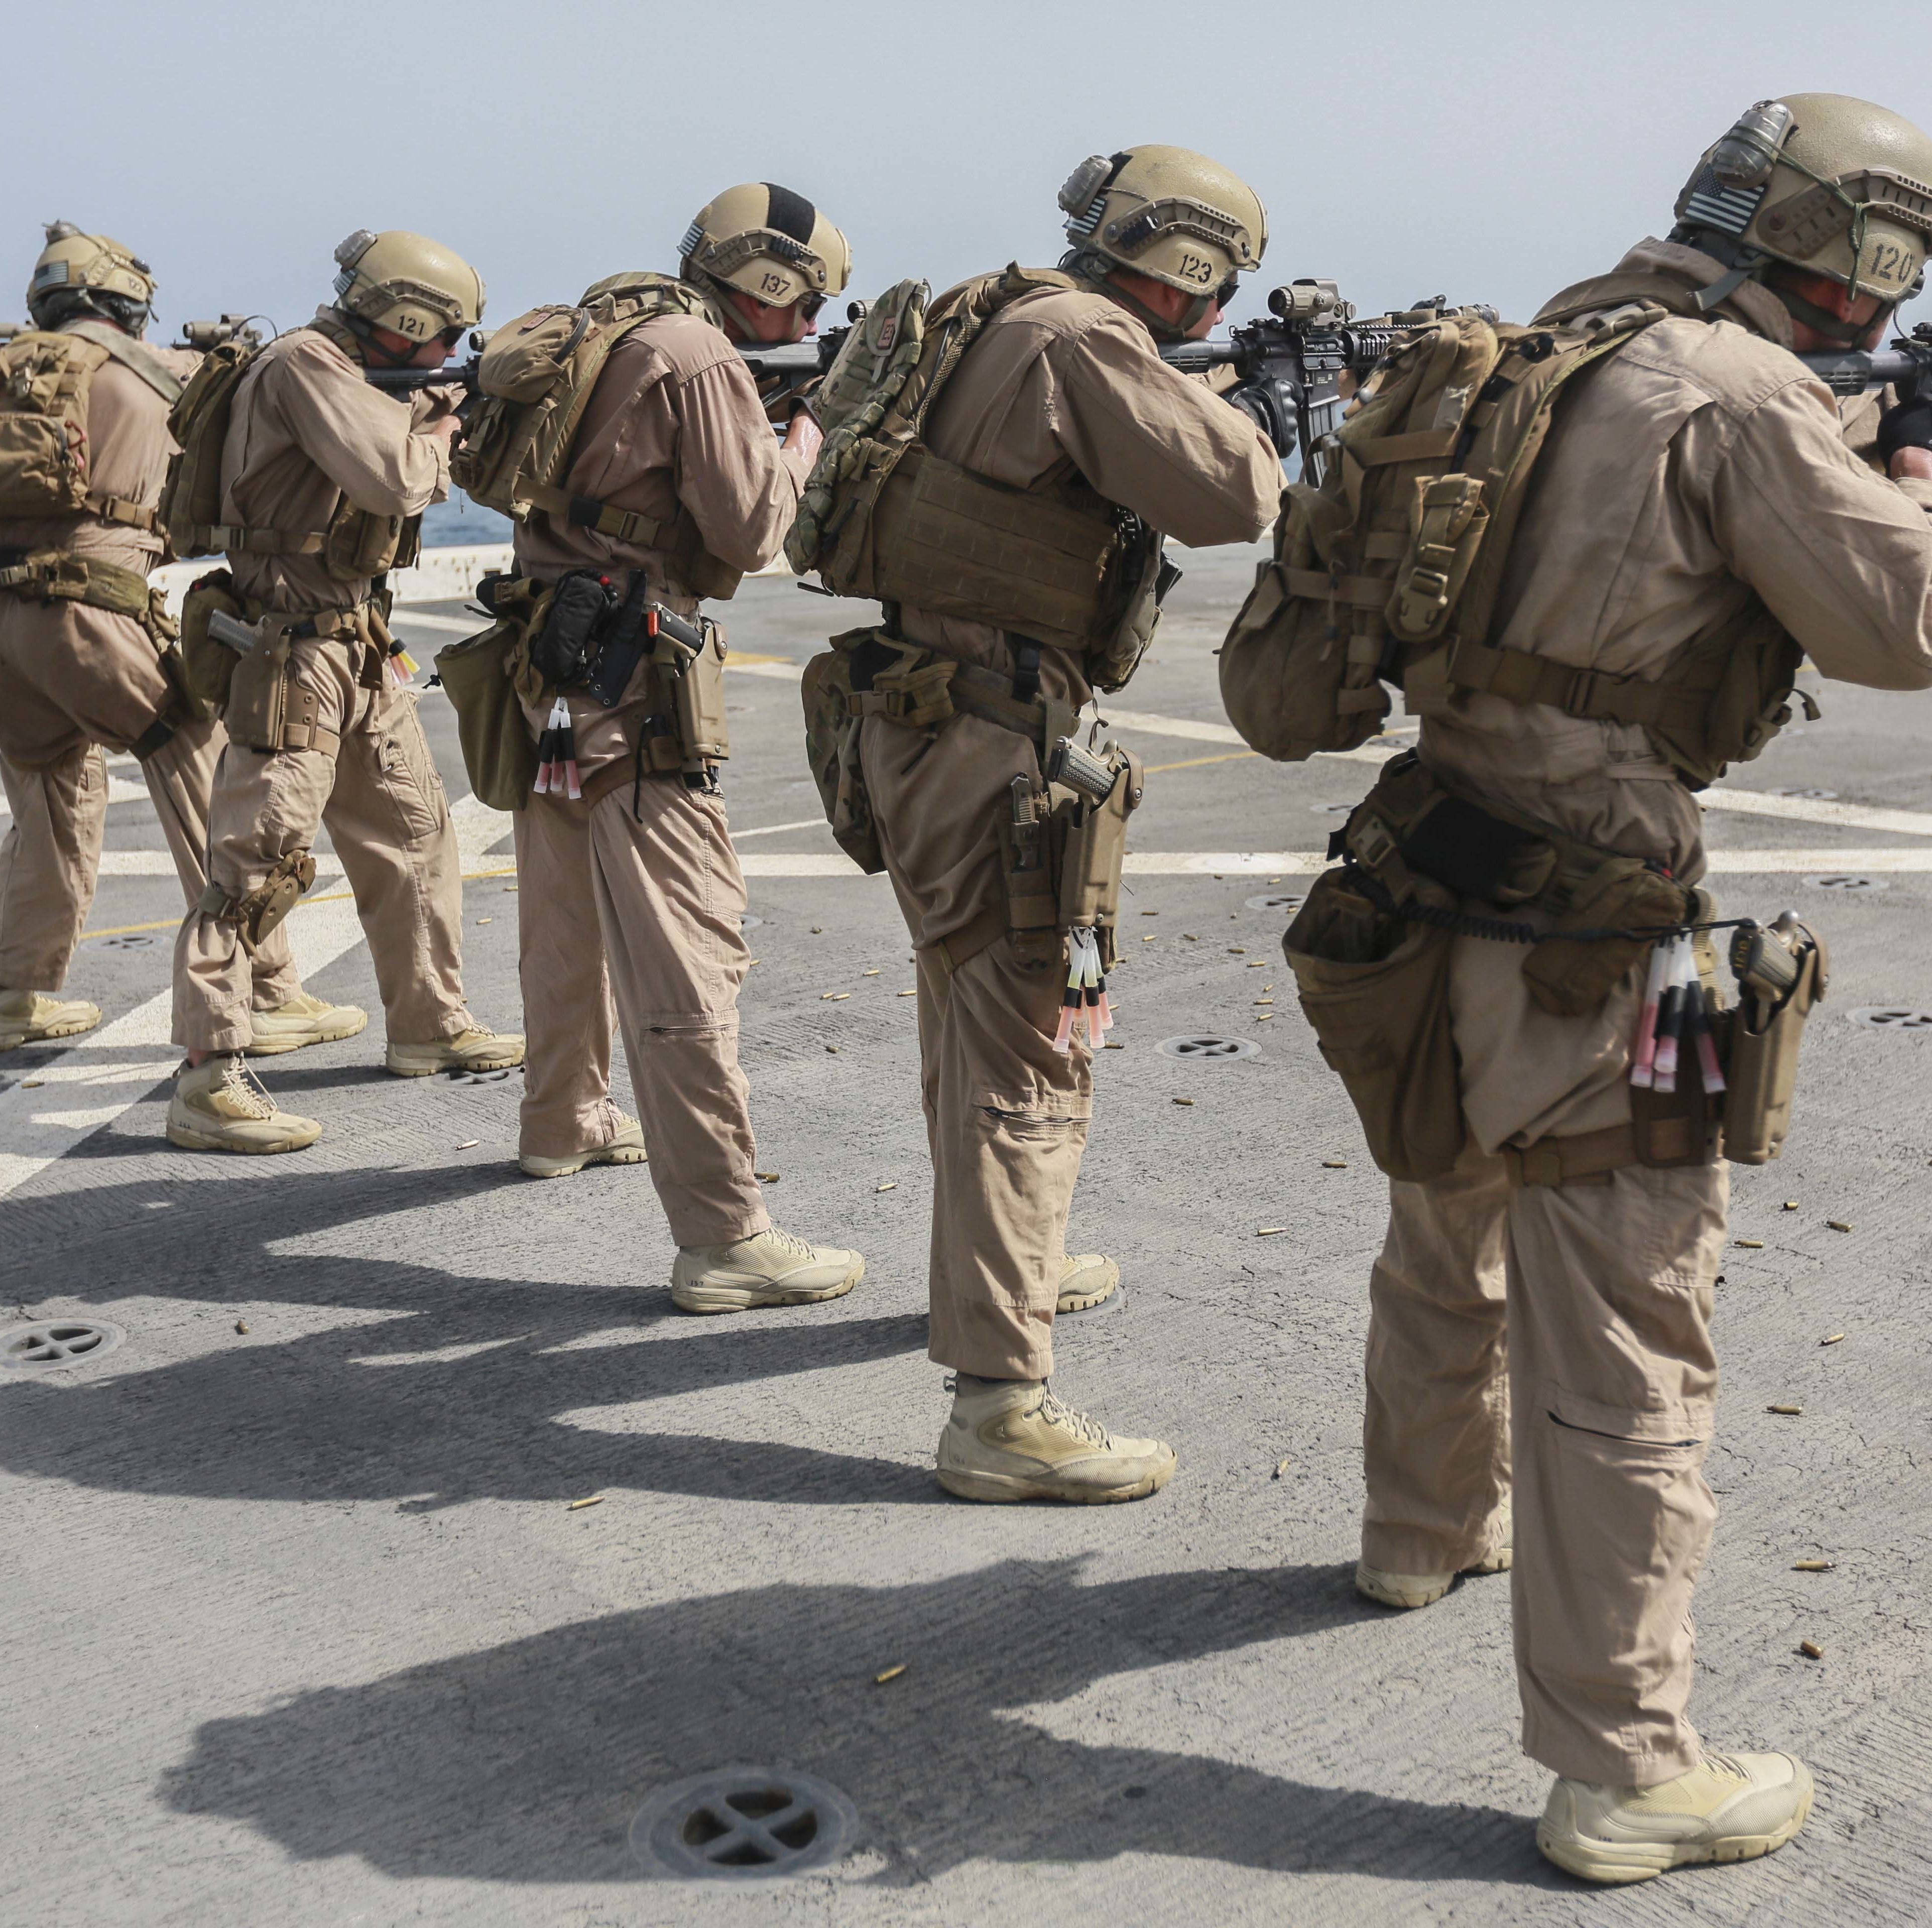 U.S. Marines Could Soon Square Off Against Iranian Troops in the Persian Gulf. Here's What's at Stake